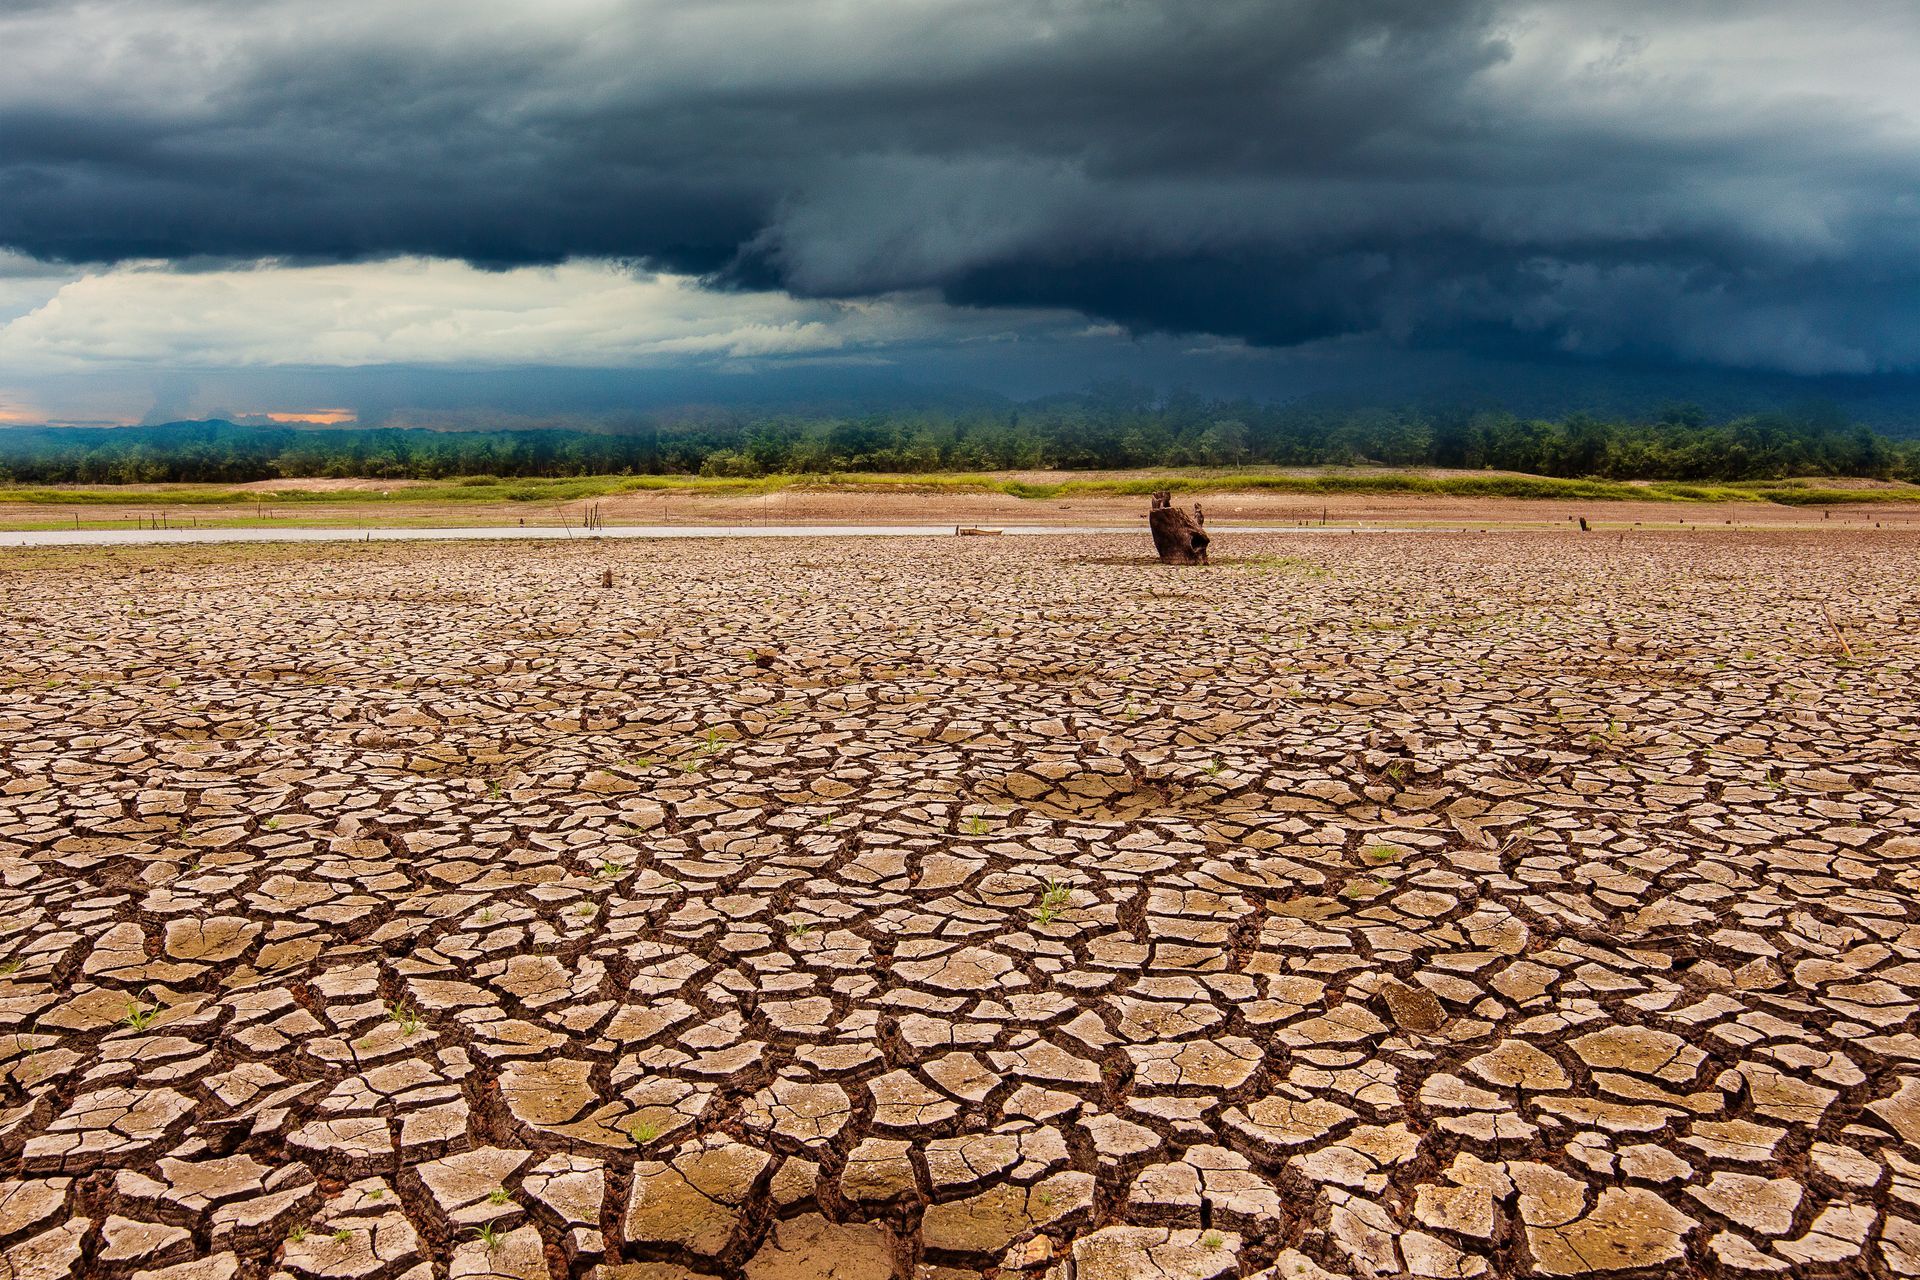 A storm cloud rolls over a dry and cracked landscape.